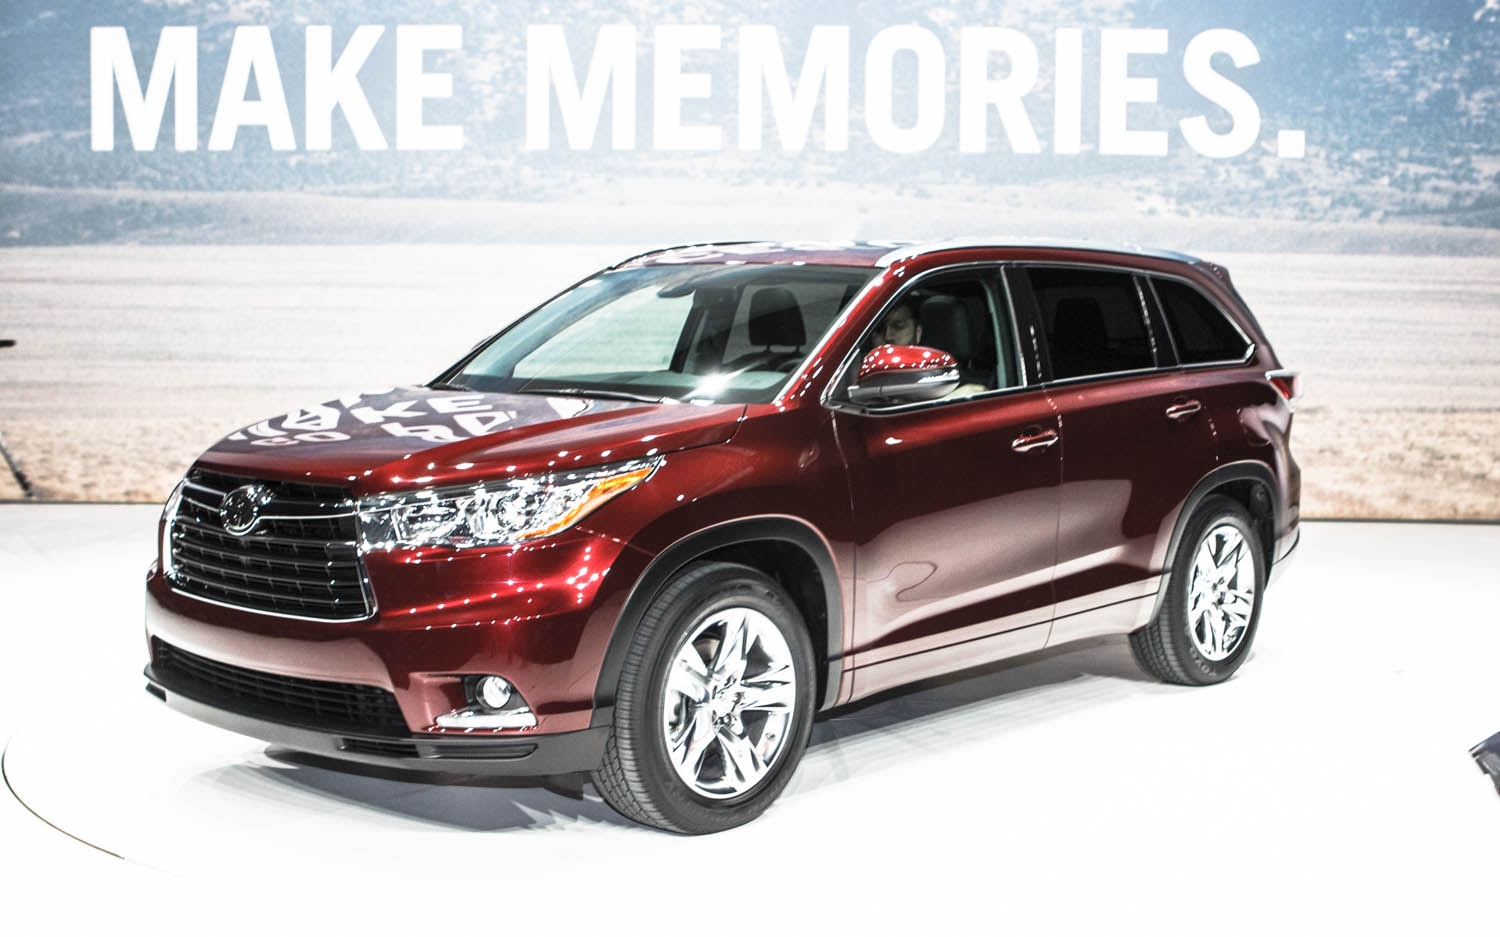 2014 toyota highlander msrp is it affordable new car invoice prices 2014